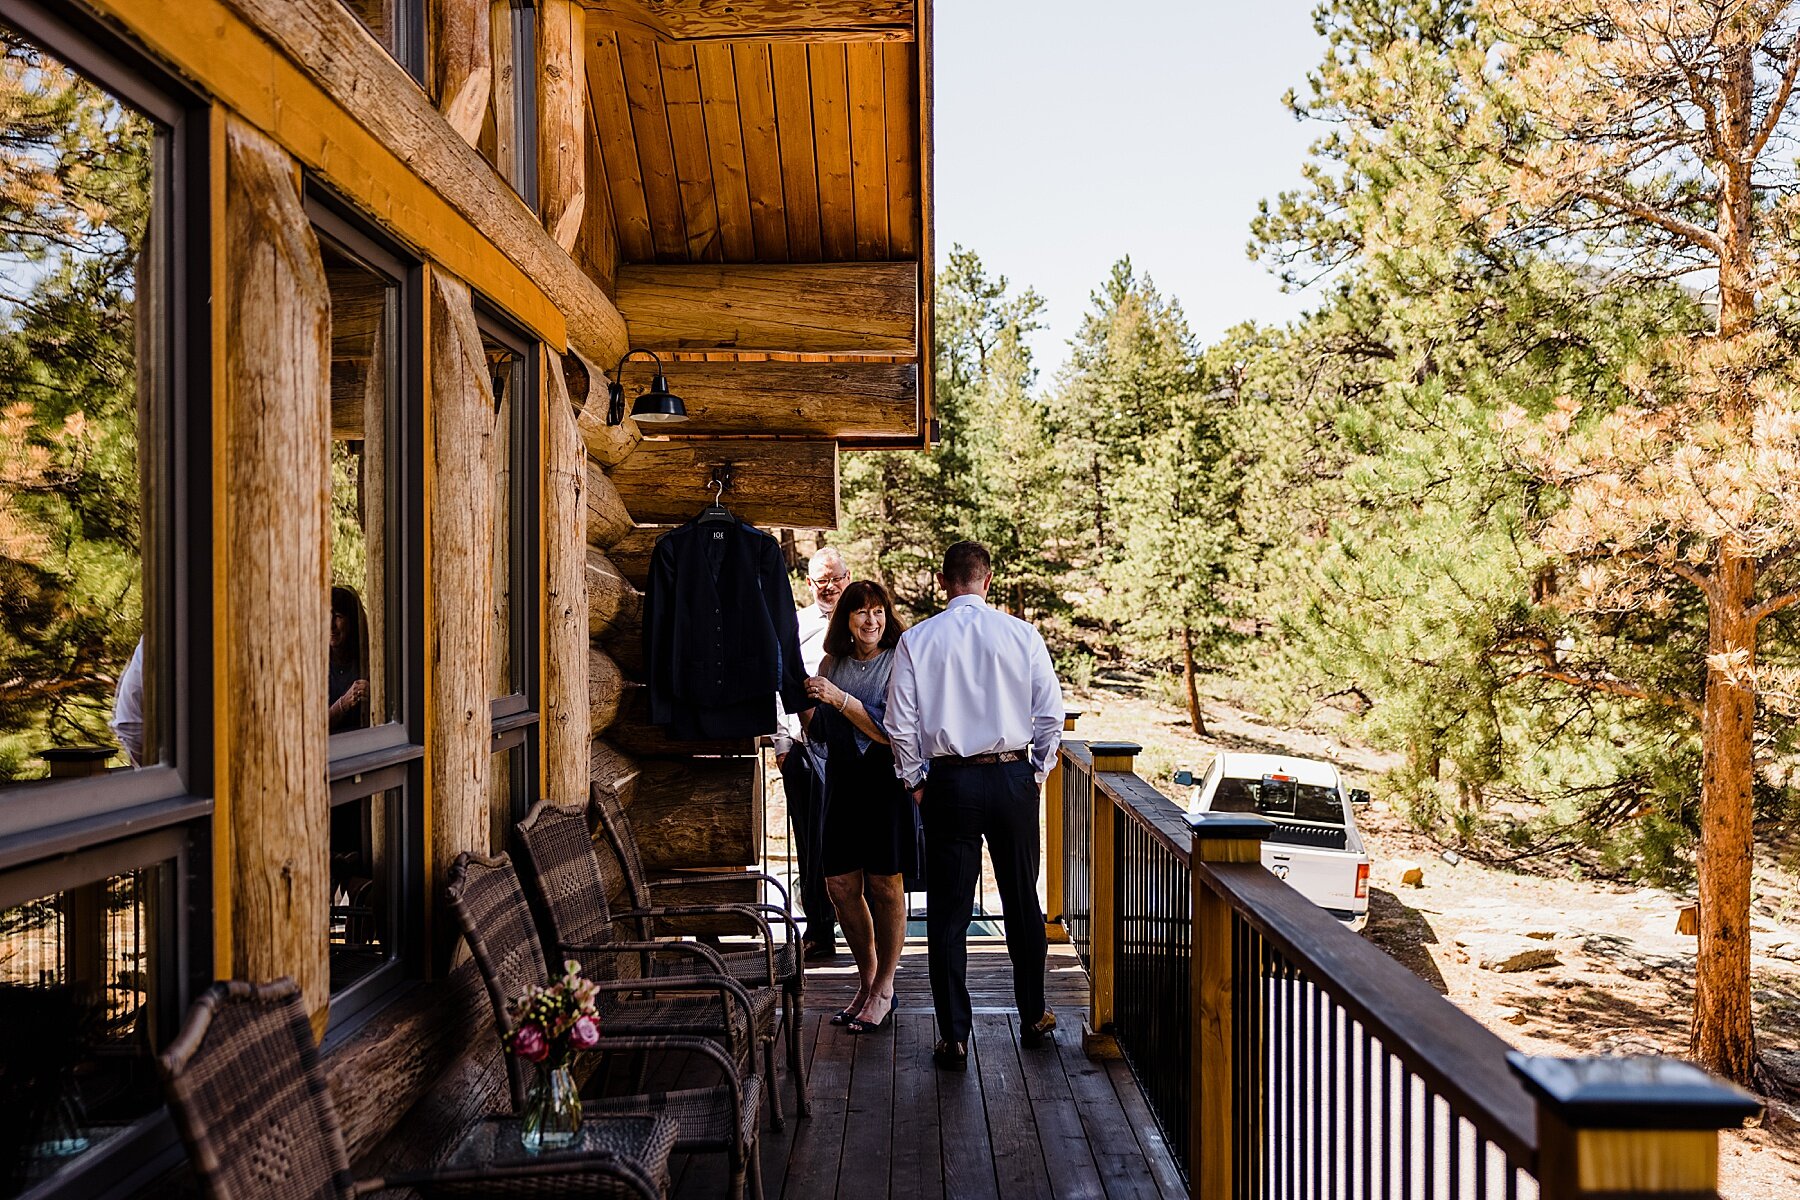 Rocky Mountain National Park Elopement at 3M Curve and Bear Lake